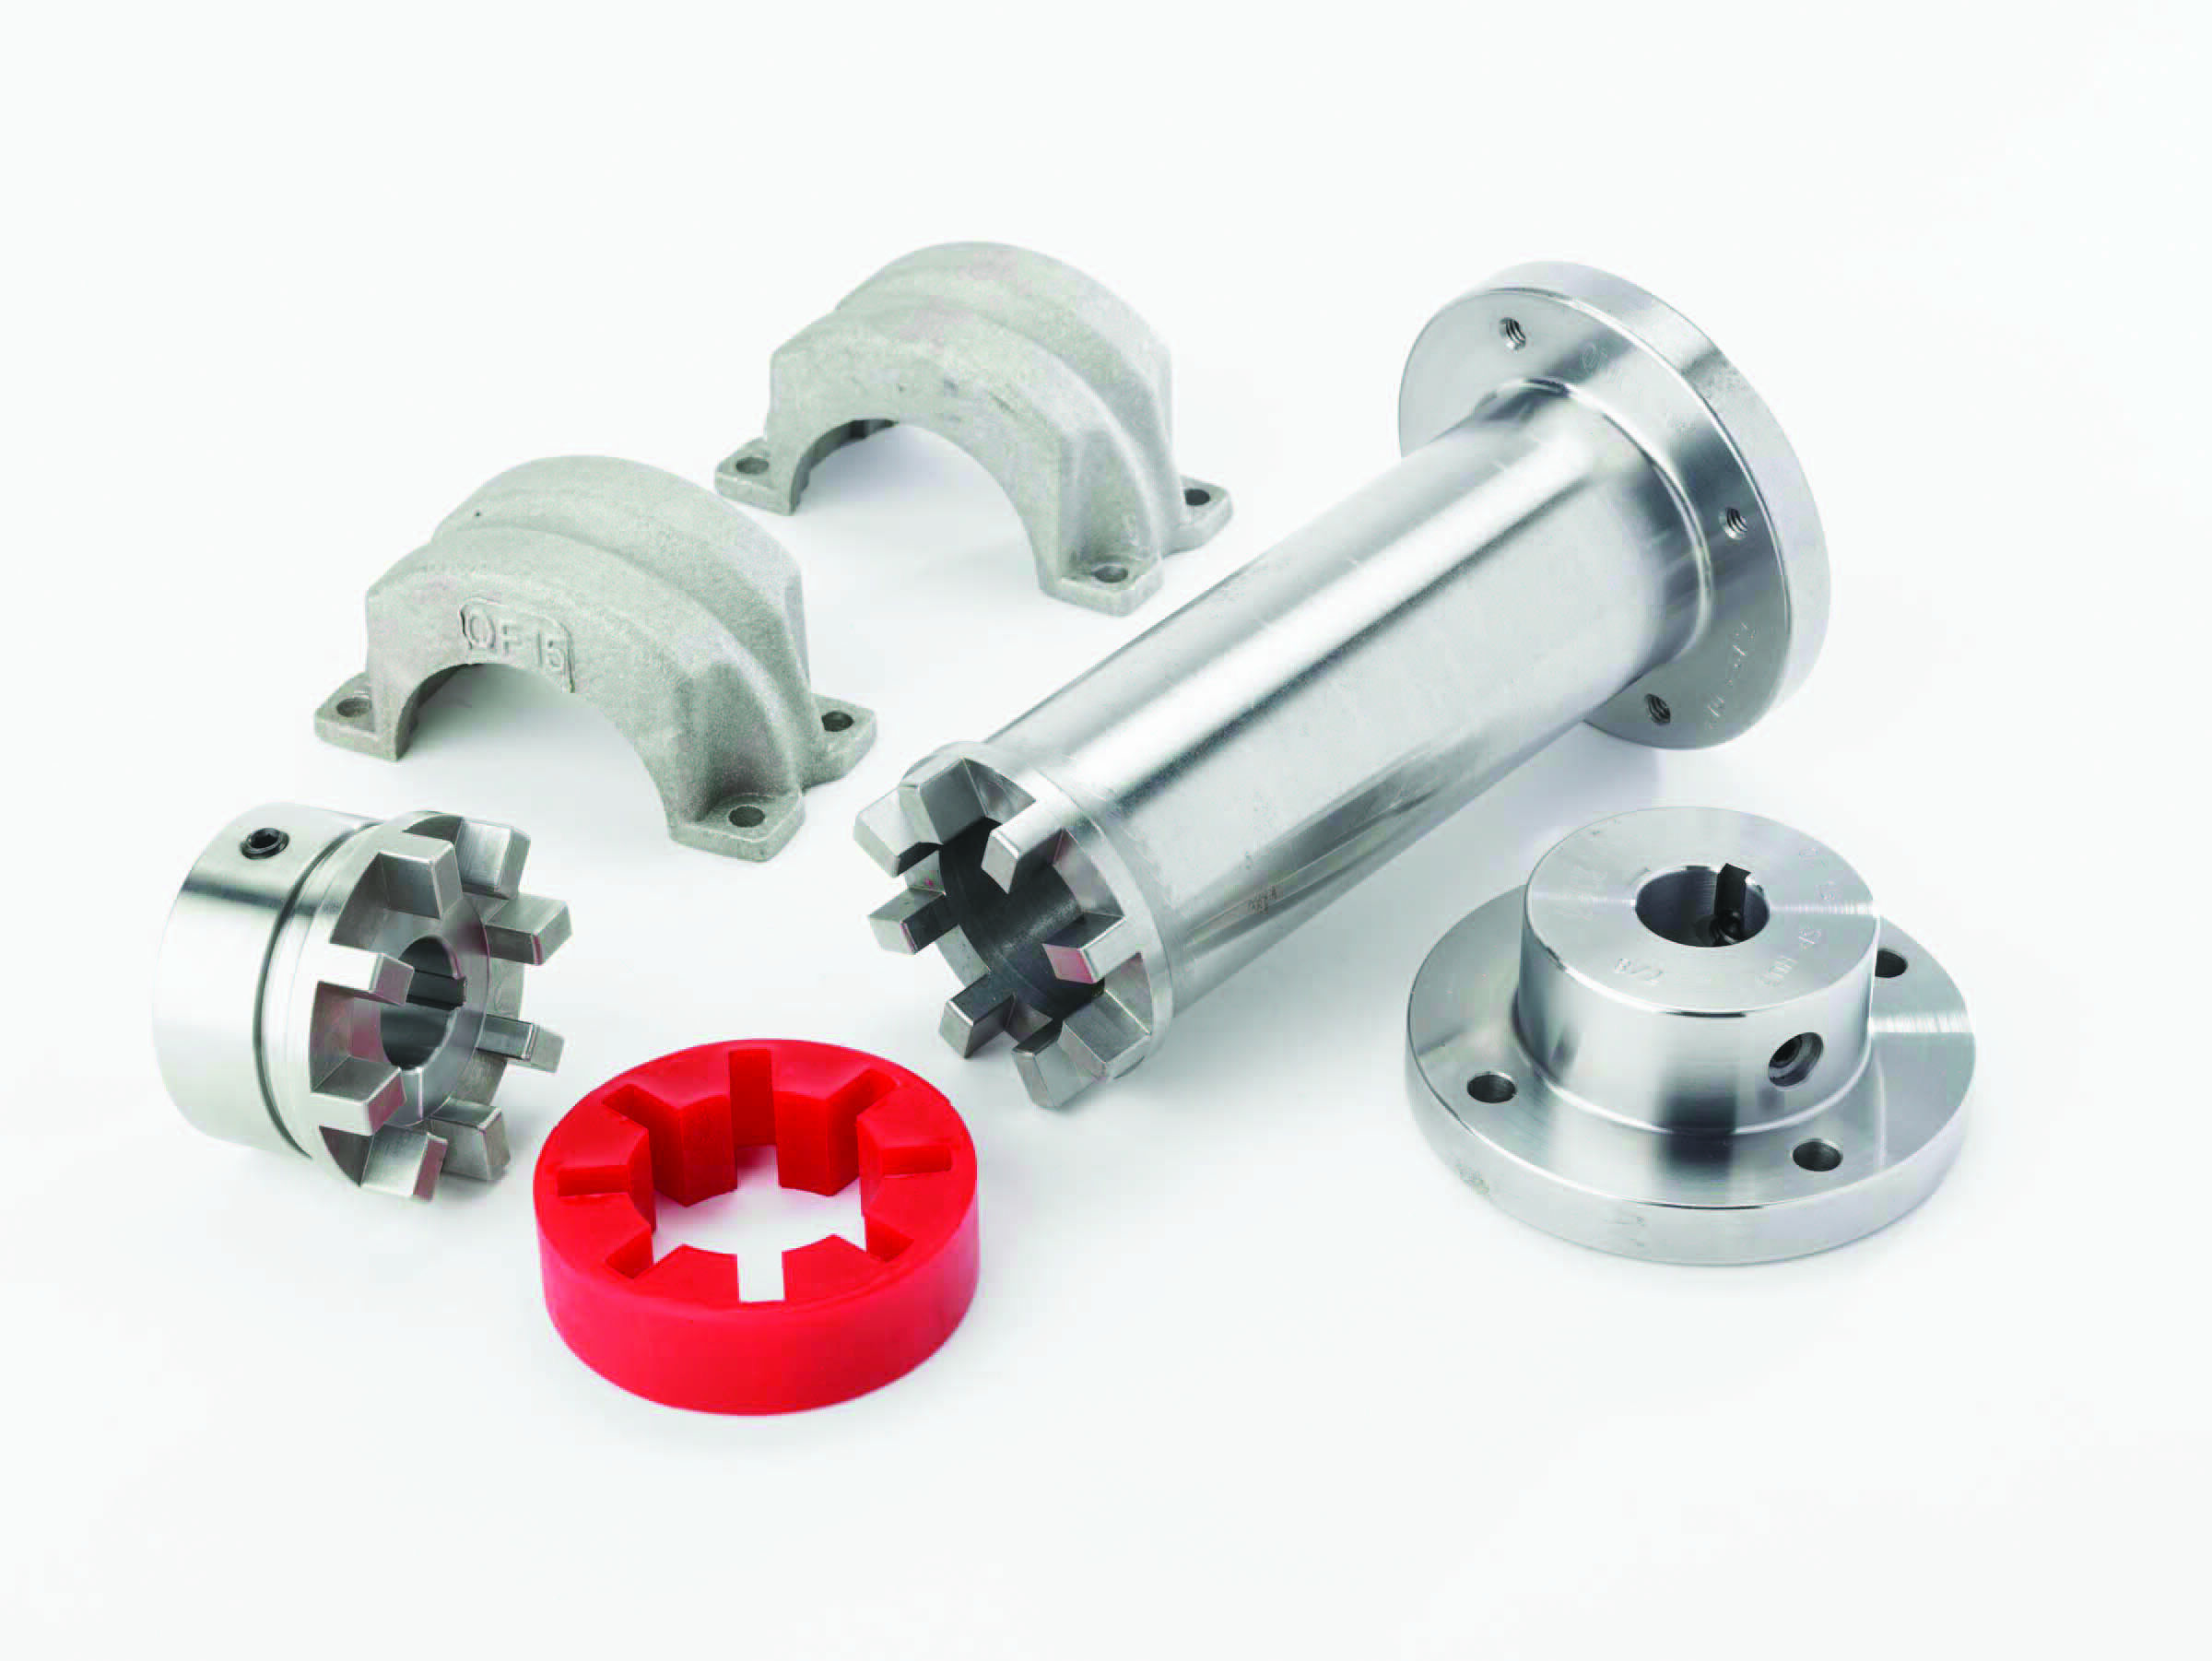 Quick Flex elastomeric couplings face the challenges of harsh environments